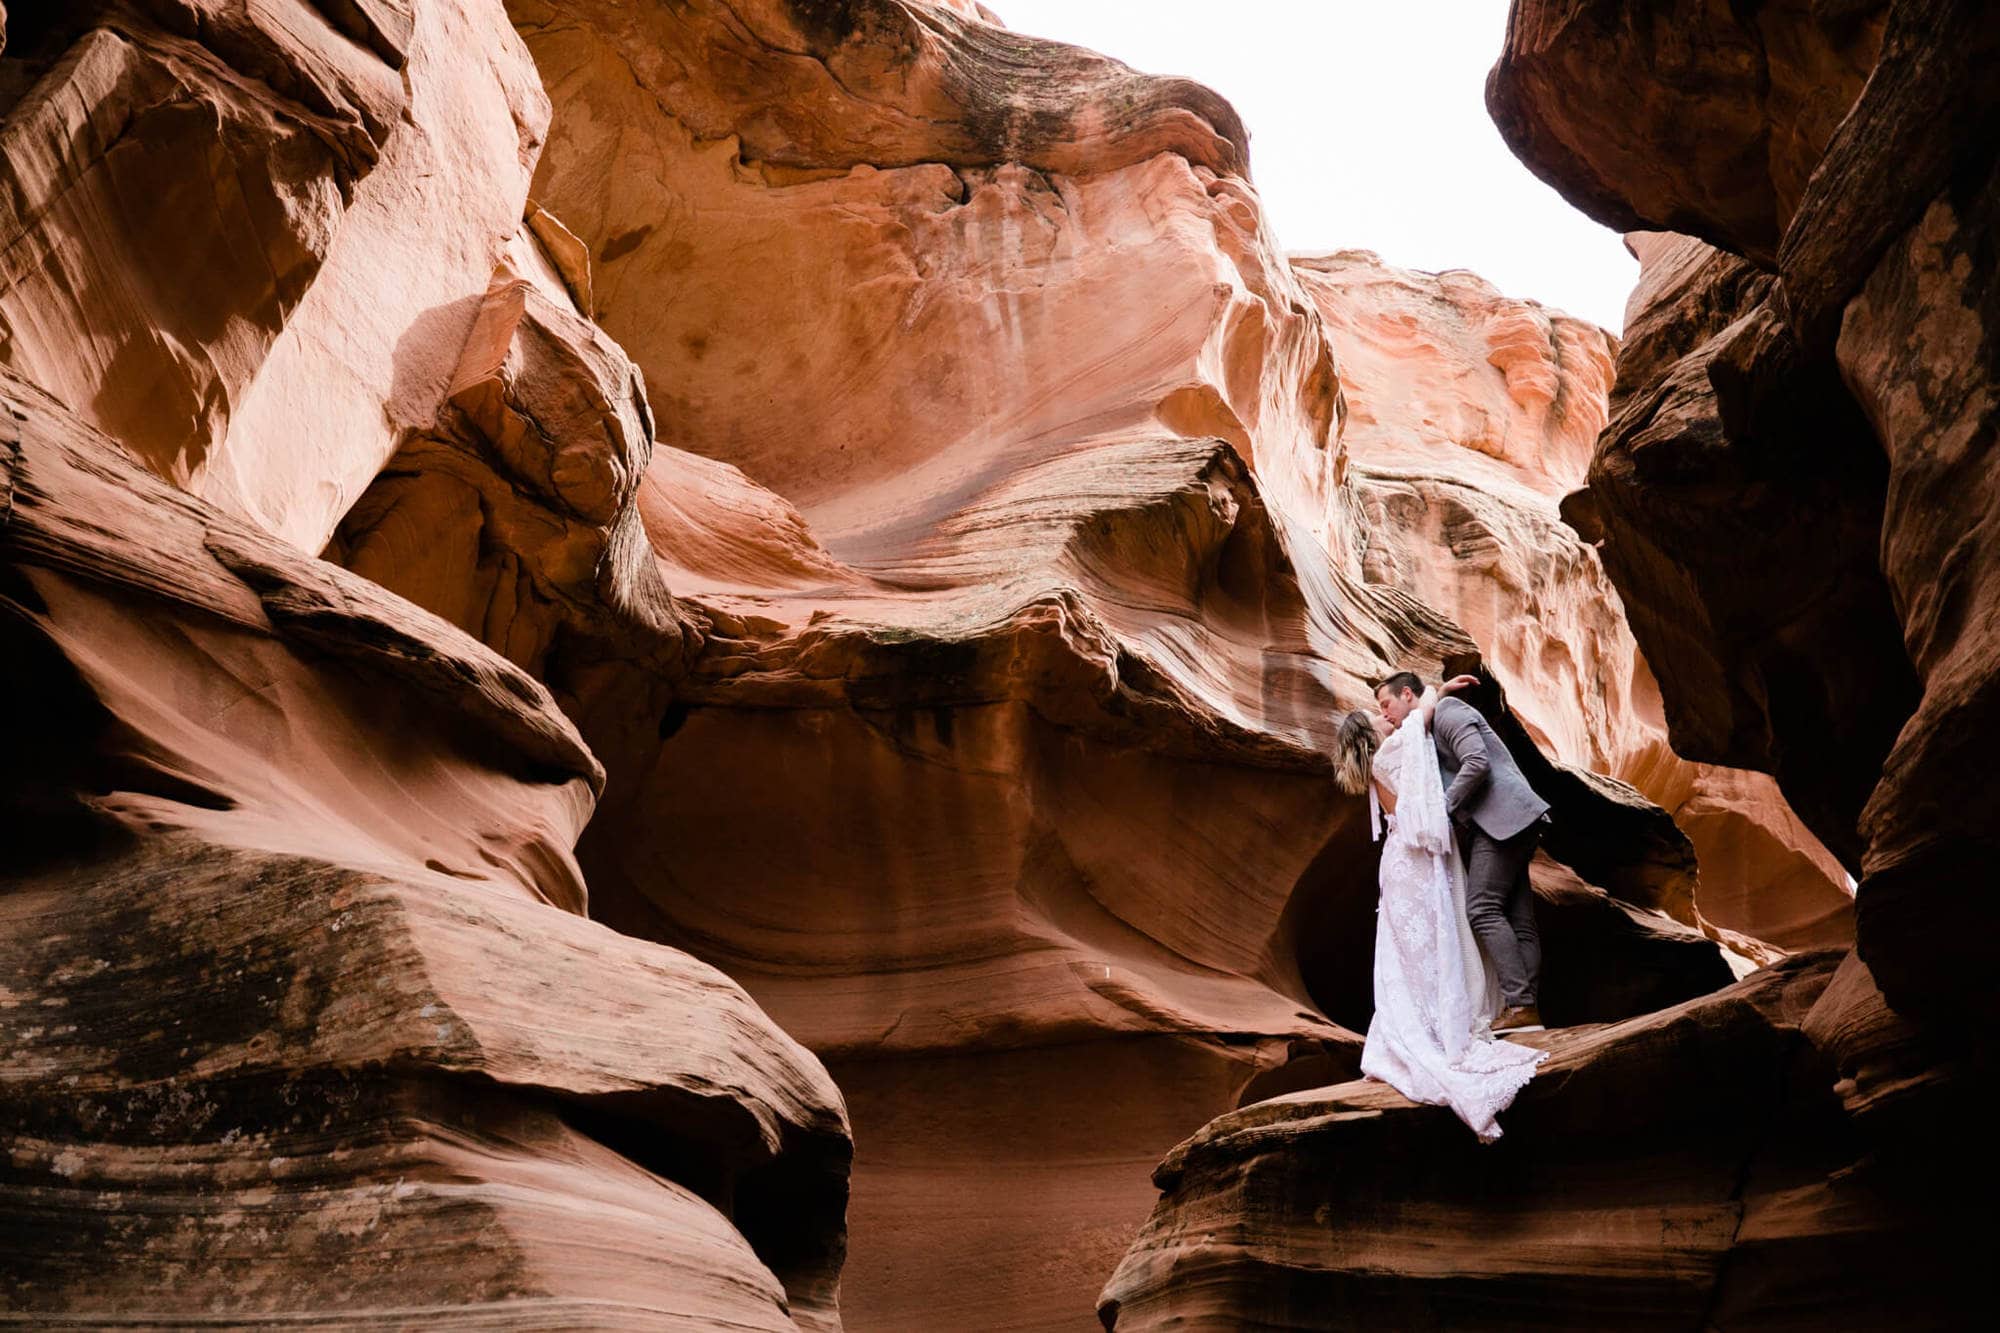 During their elopement in Arizona, the bride and groom share a kiss perched high on an outcropping of the slot canon.